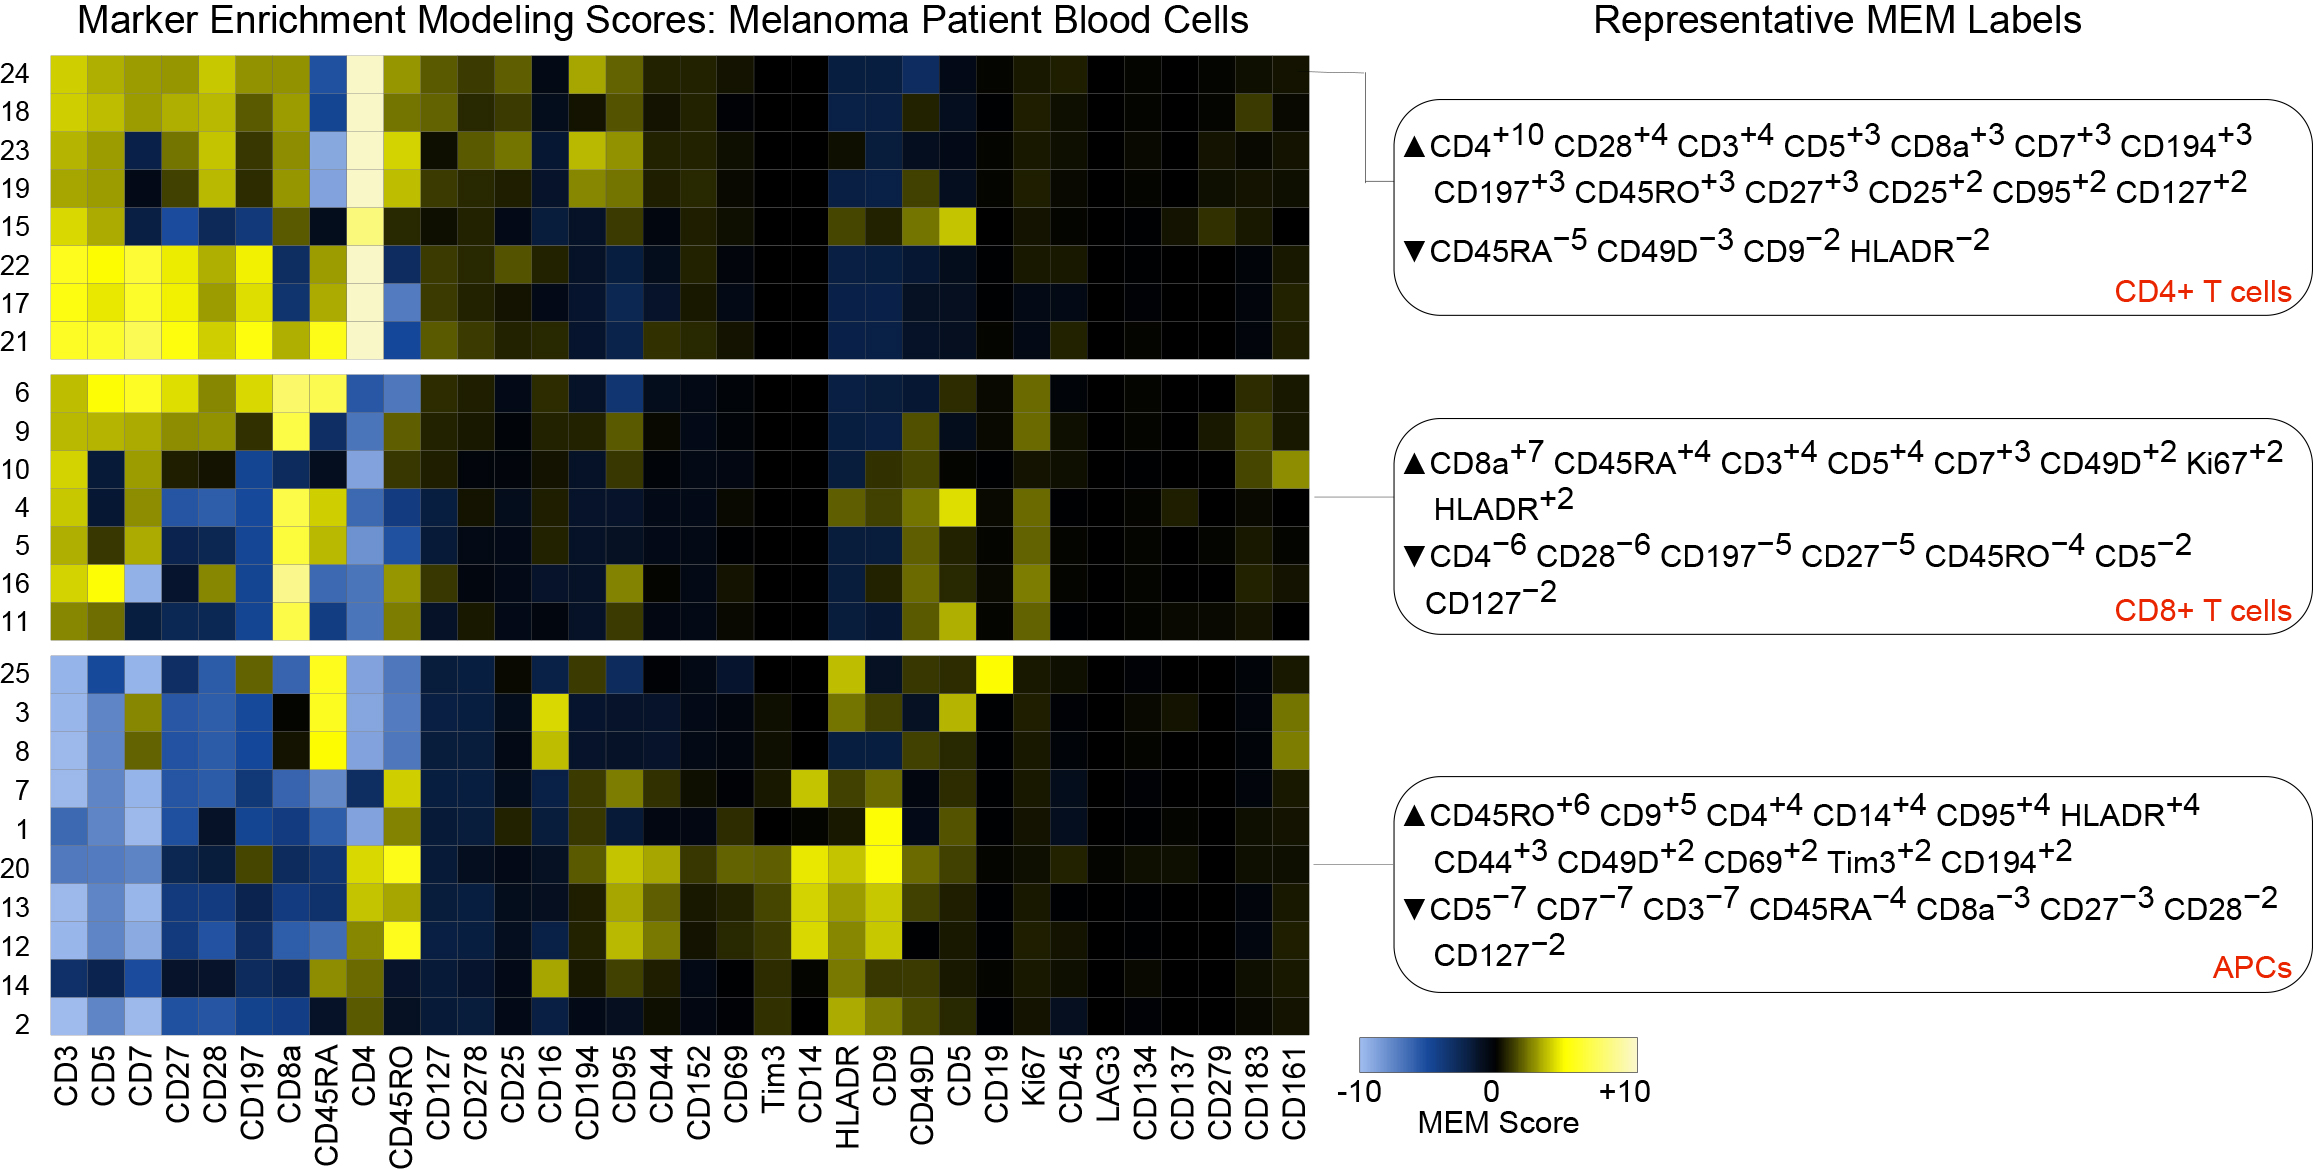 Diggins et al., Current Protocols in Cytometry - Measure and share cell identity with a MEM label